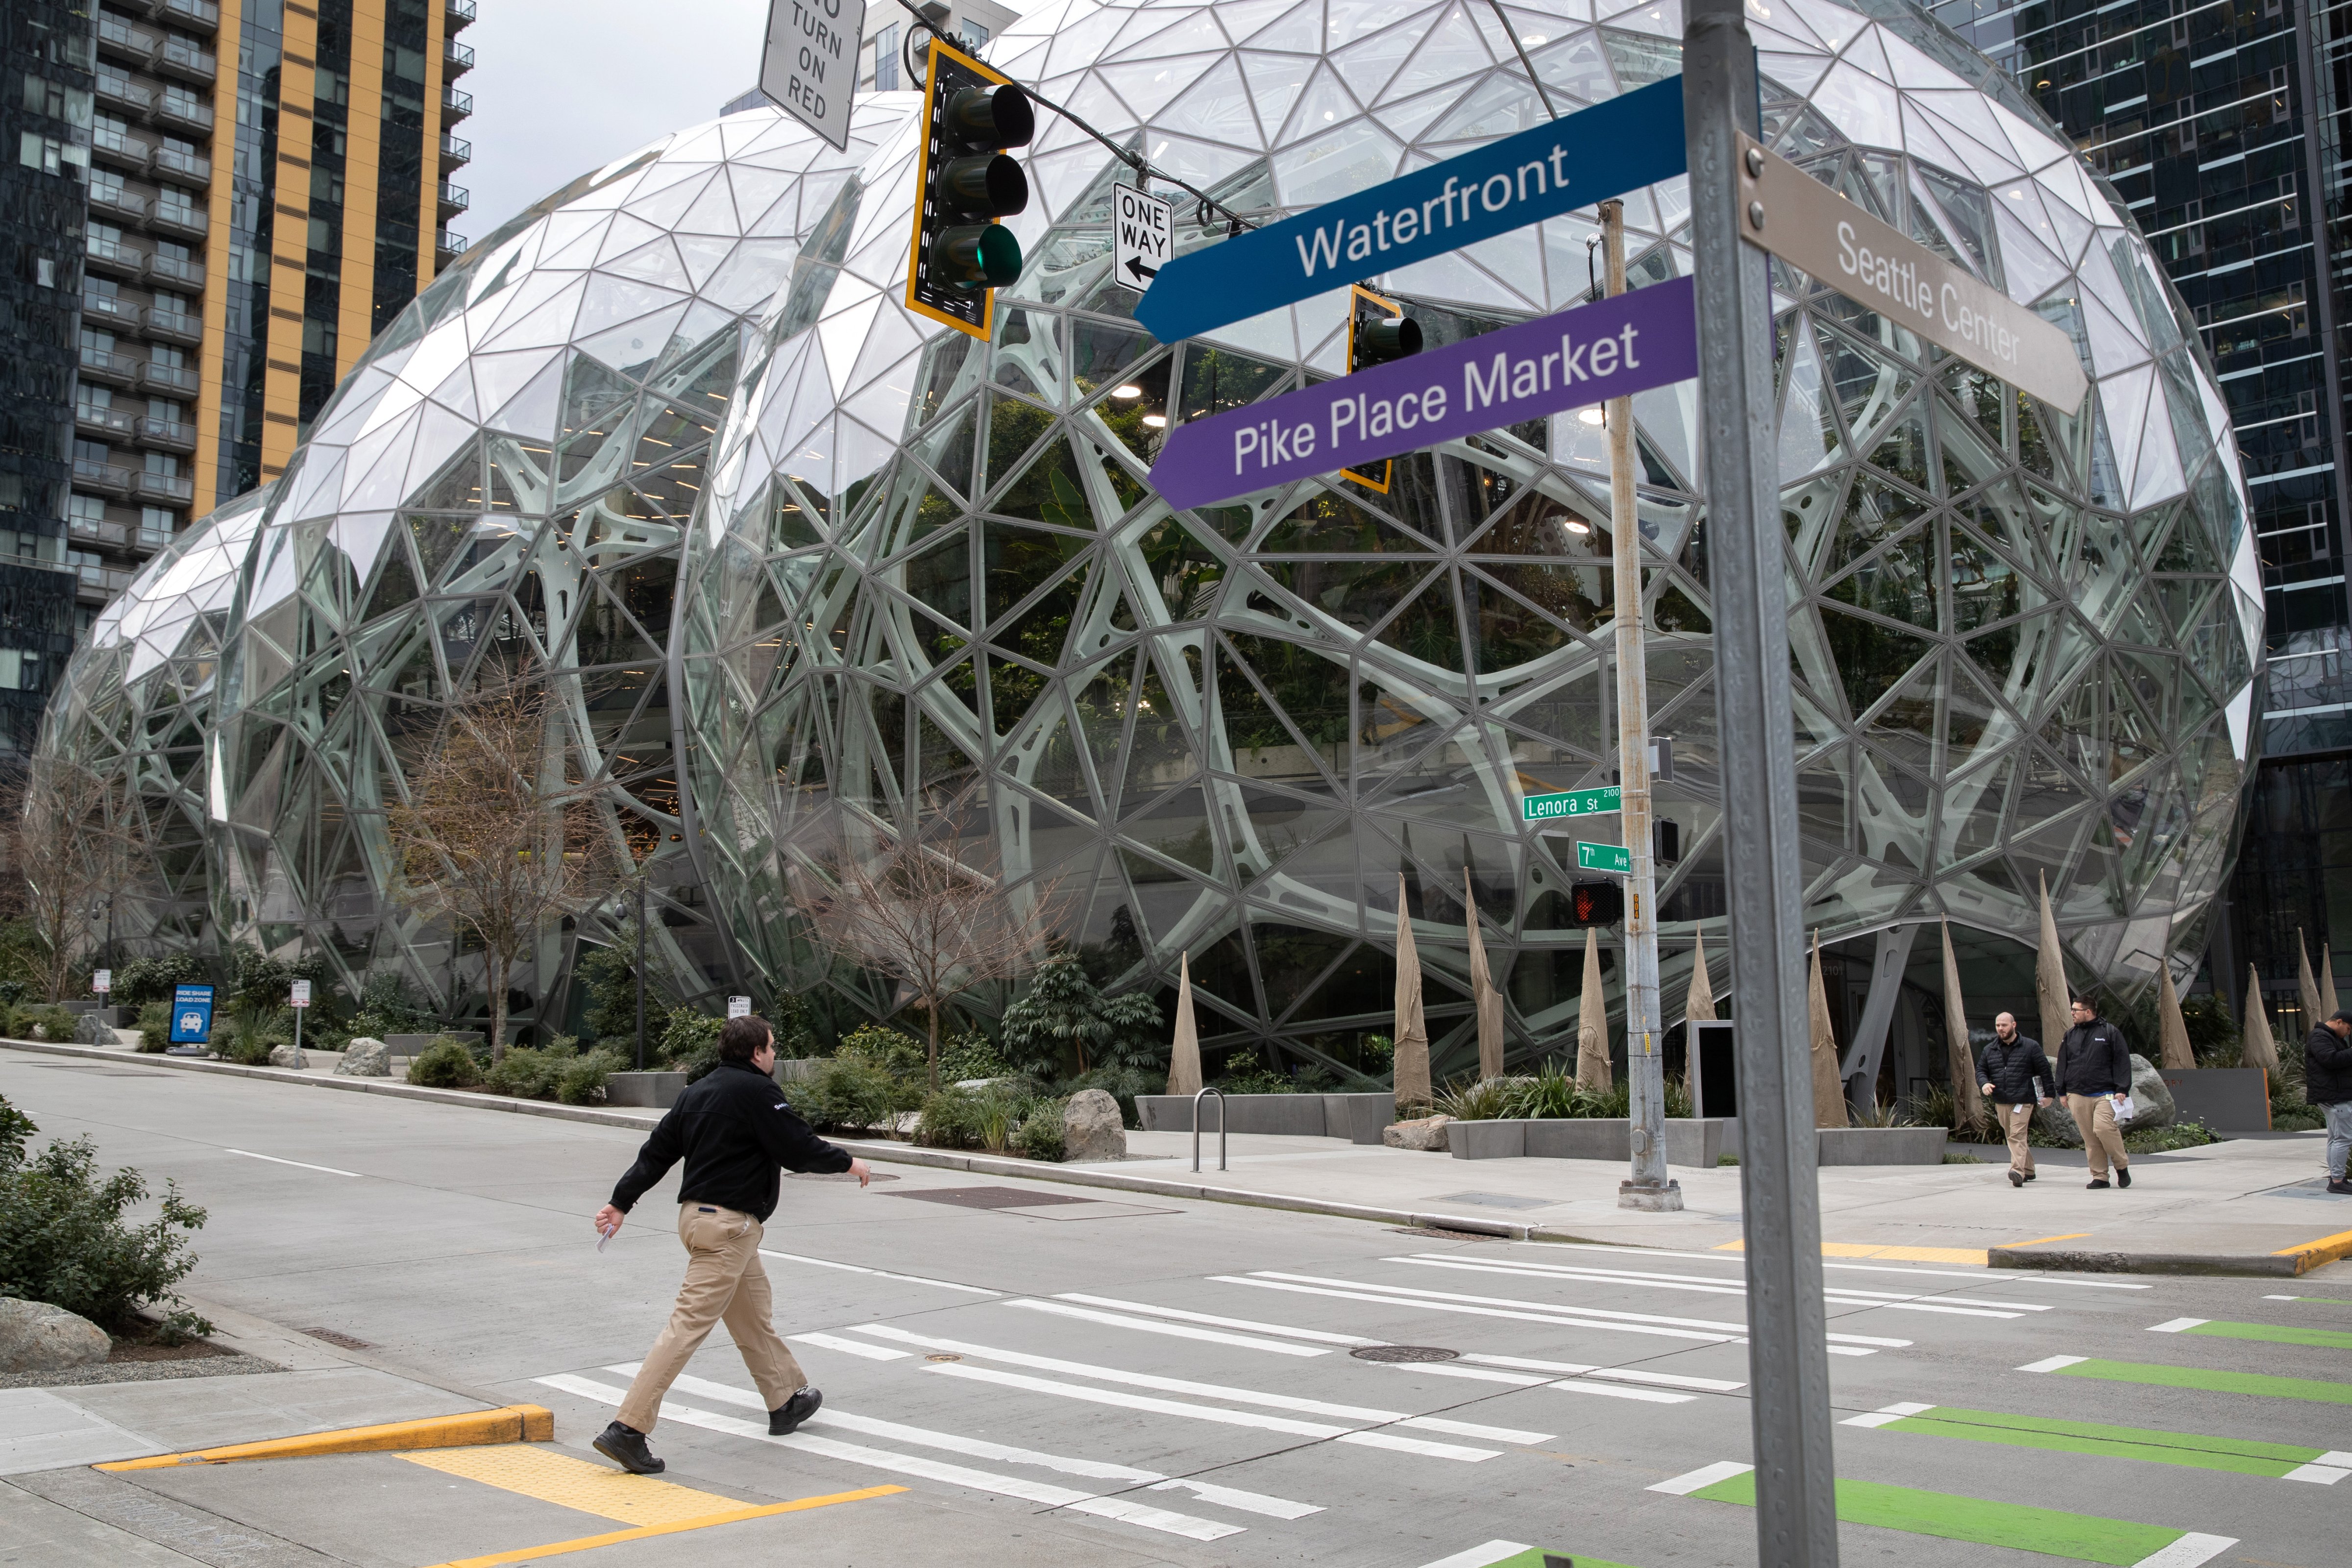 The Amazon headquarters sits virtually empty on March 10, 2020 in downtown Seattle, Washington, after employees were told to work remotely. (John Moore—Getty Images)